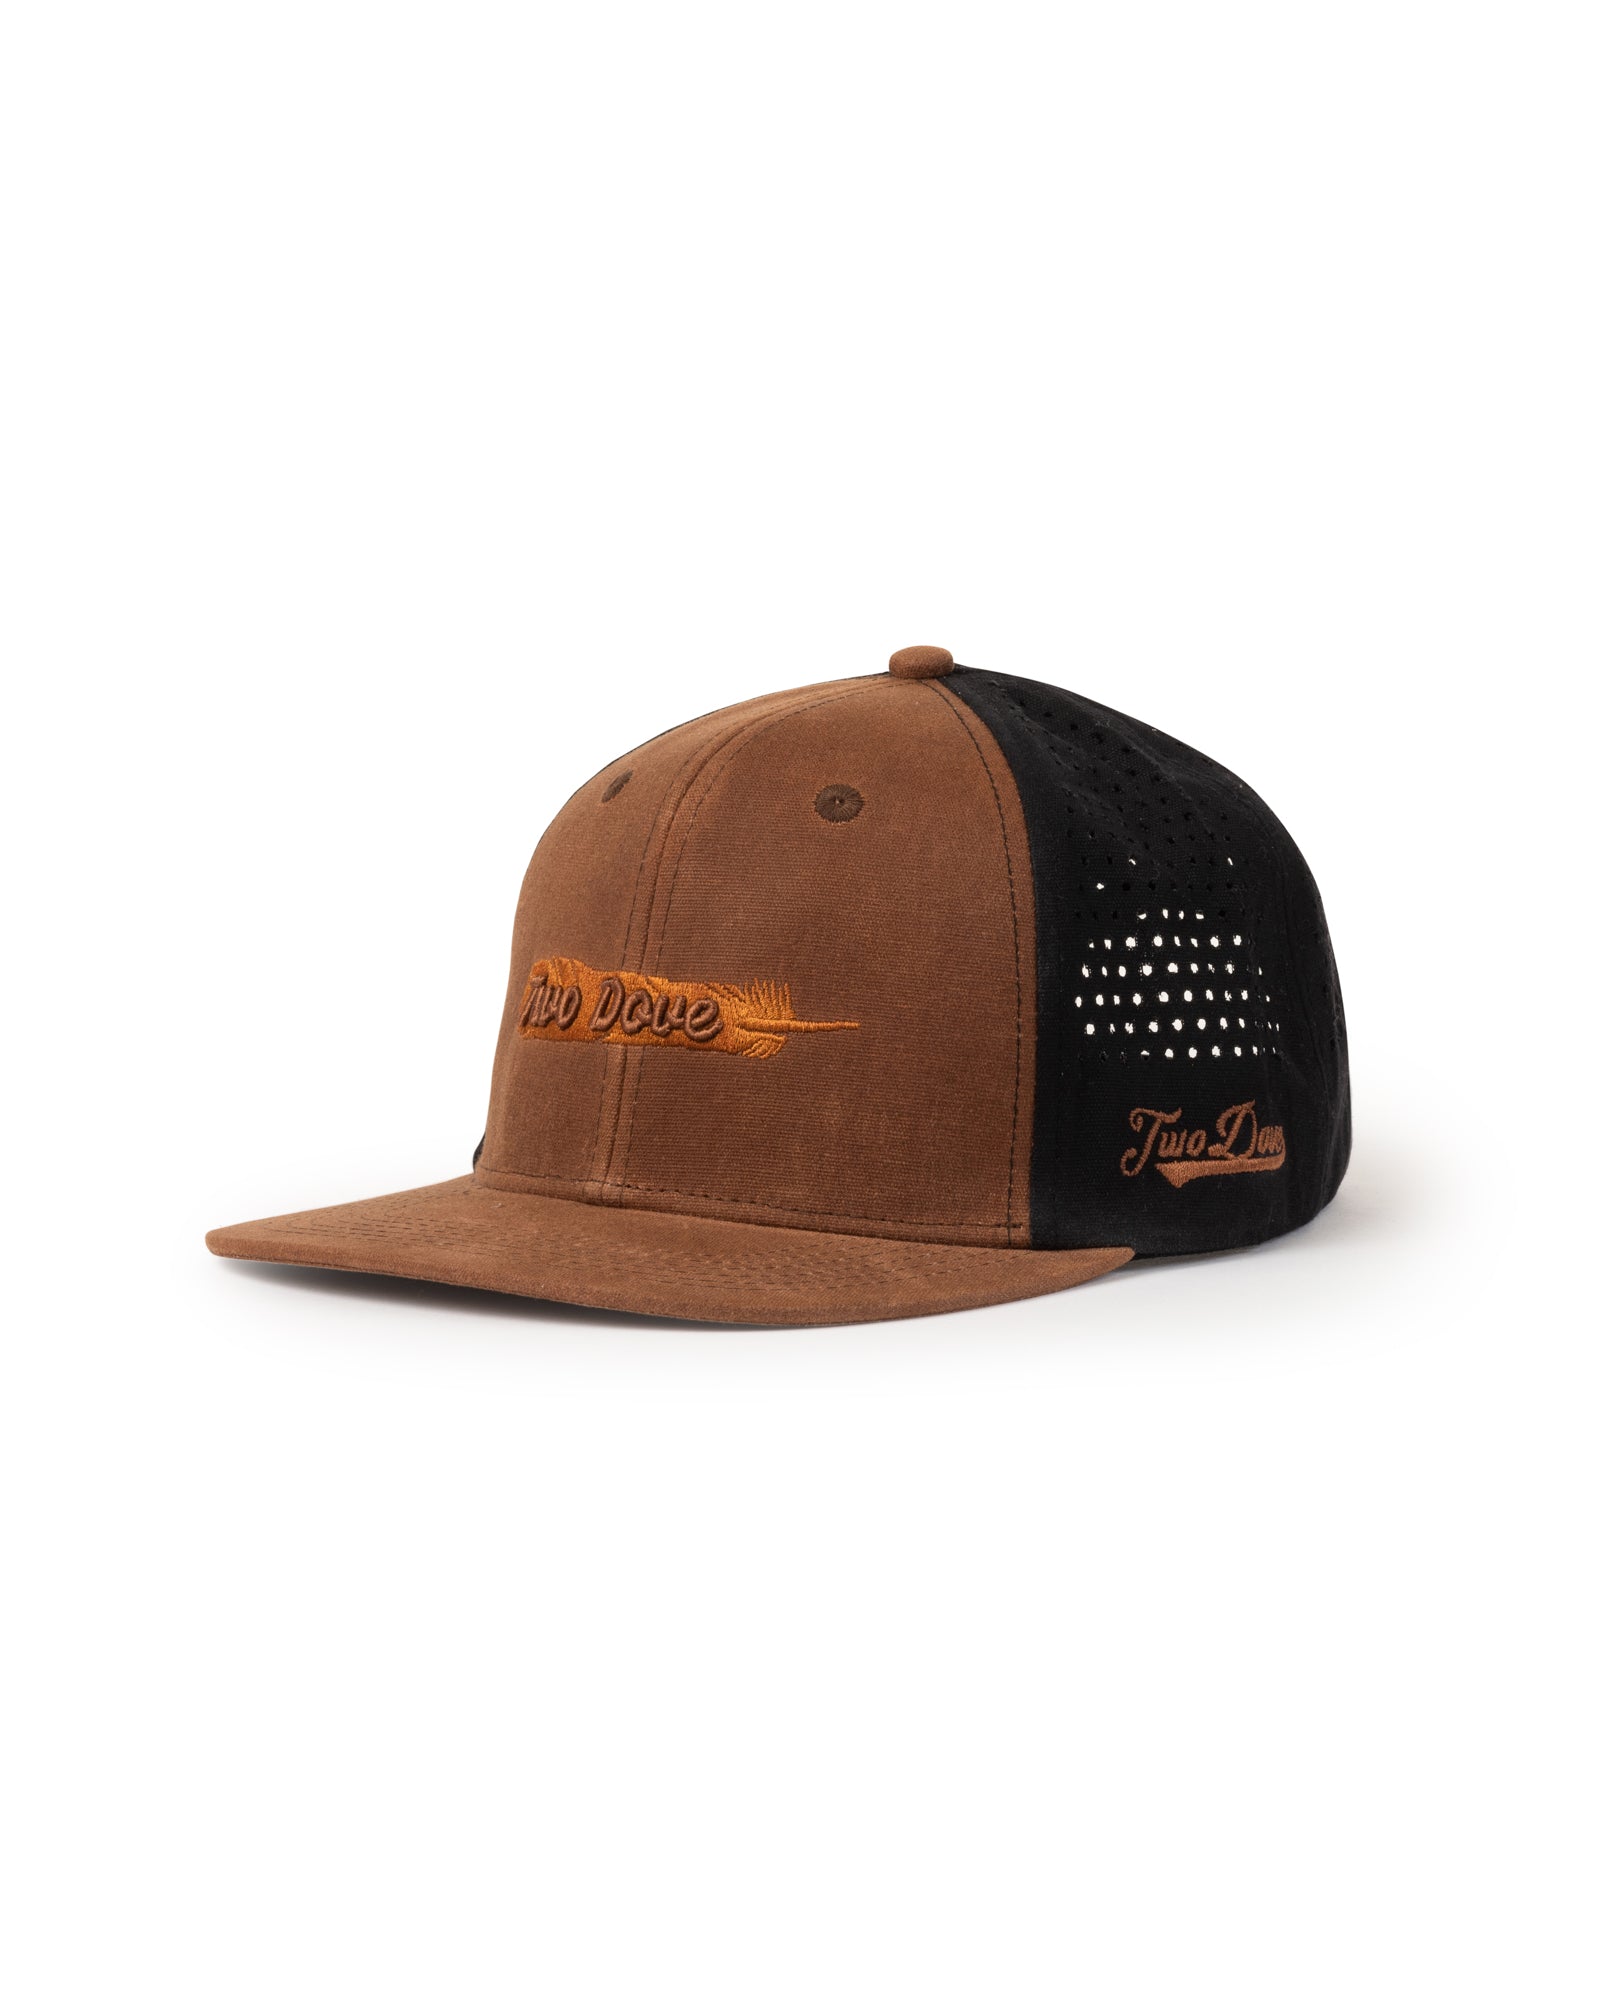 Feather Waxed Cotton Perforated Snapback - Brown/Black